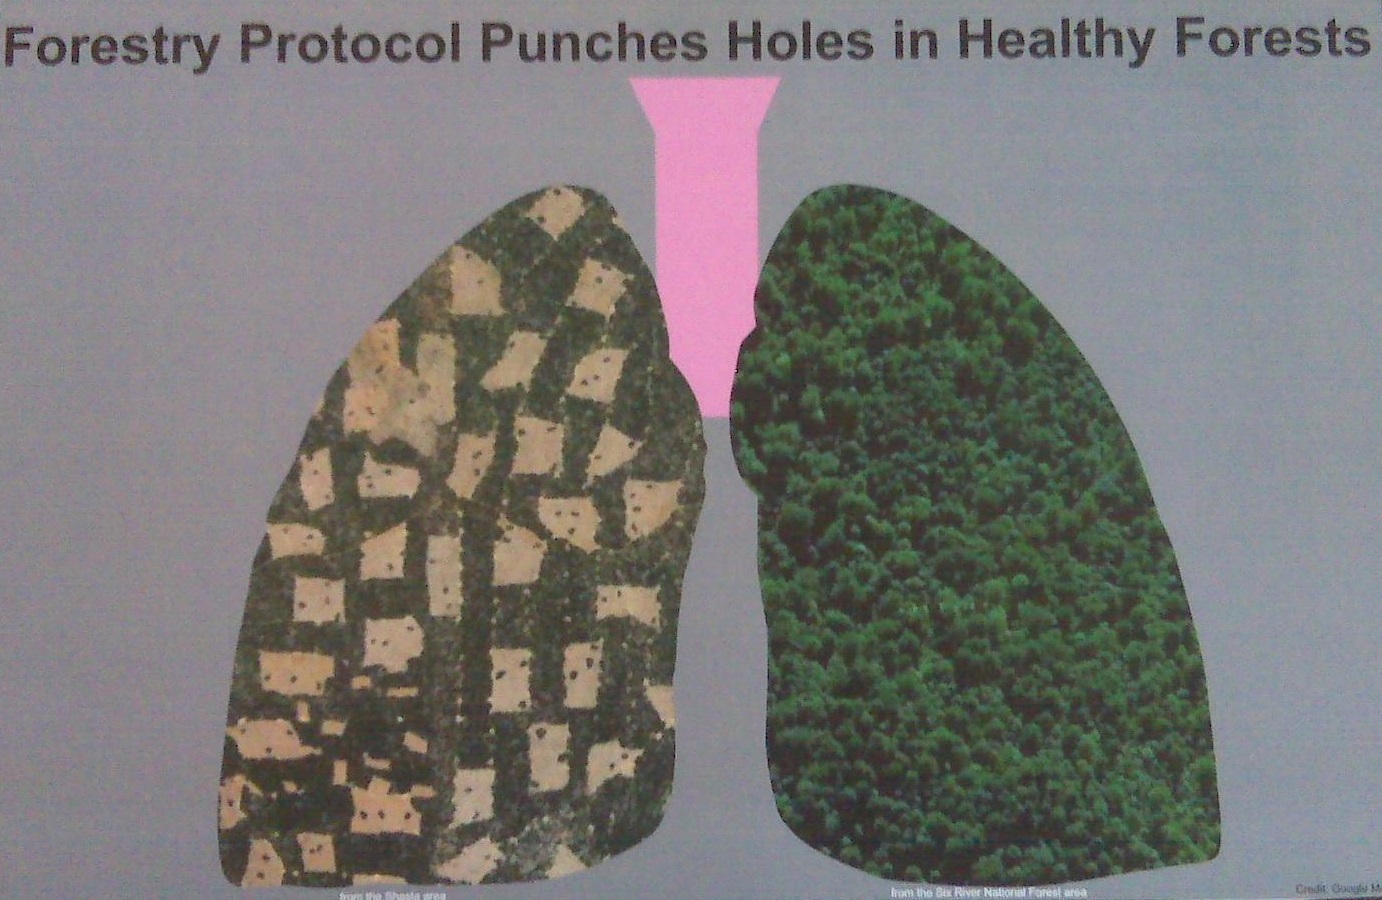 Lung Illustration re: clear cutting